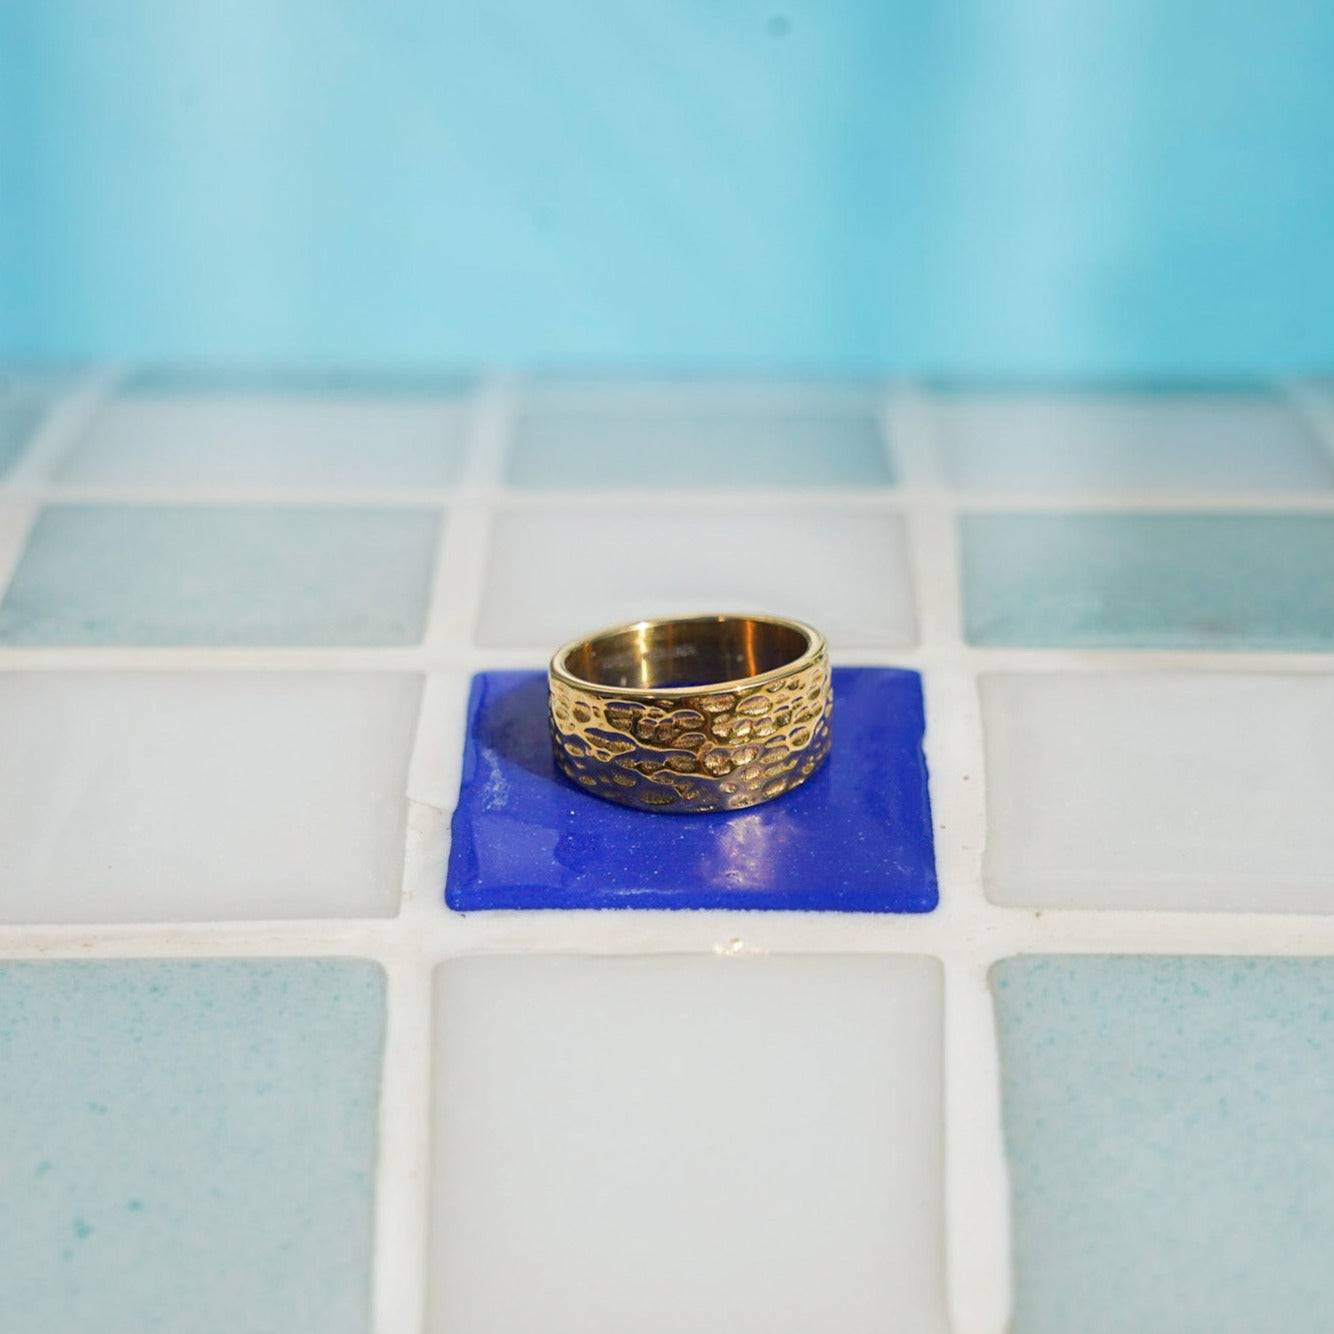 Hammered Signature - Gold-toned ring